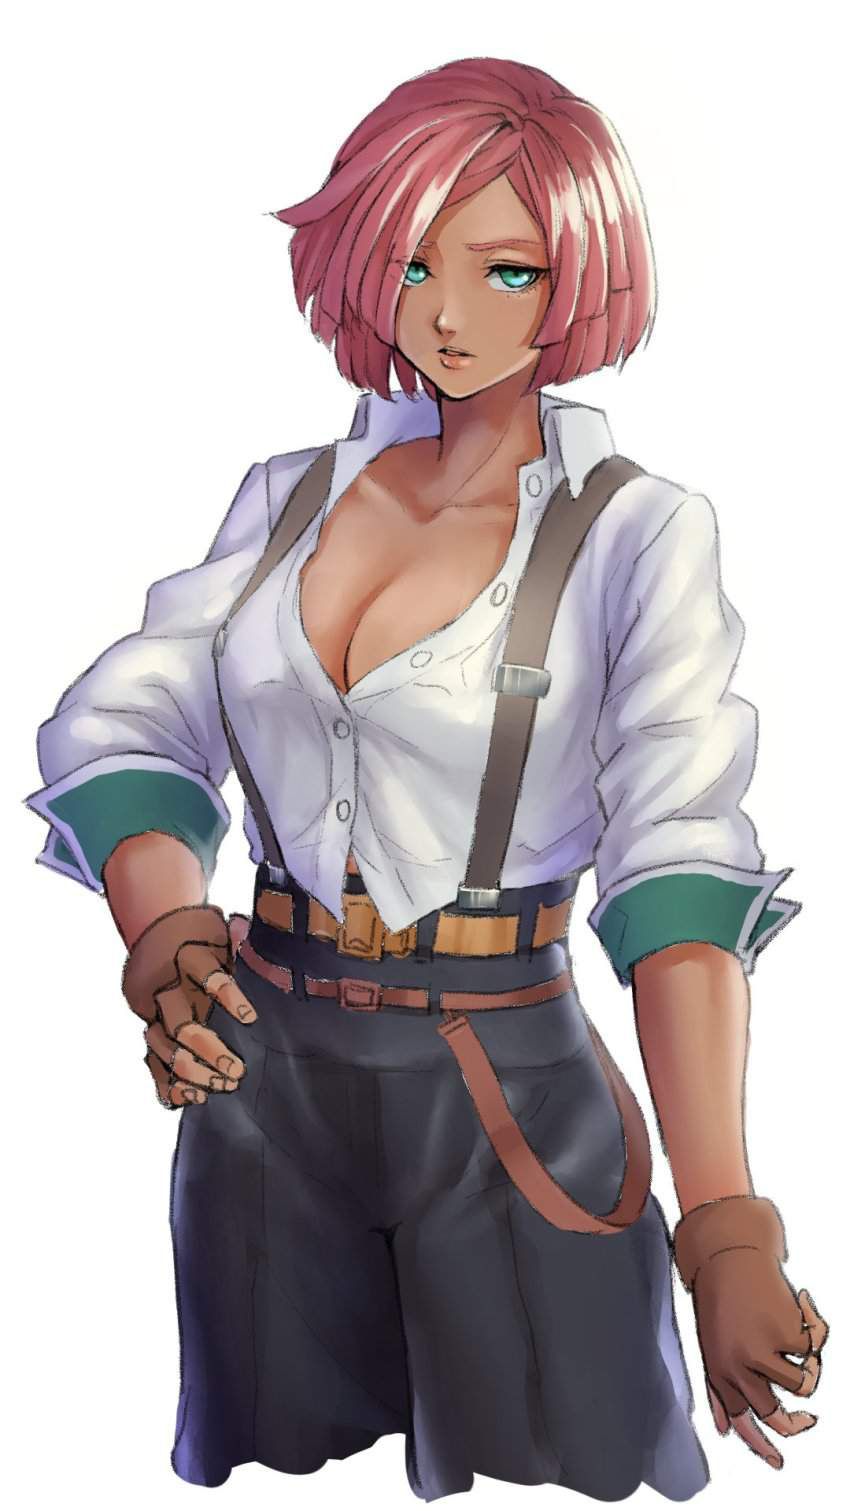 【Erotic Image】Geovana's character image that you want to use as a reference for Guilty Gear's erotic cosplay 8